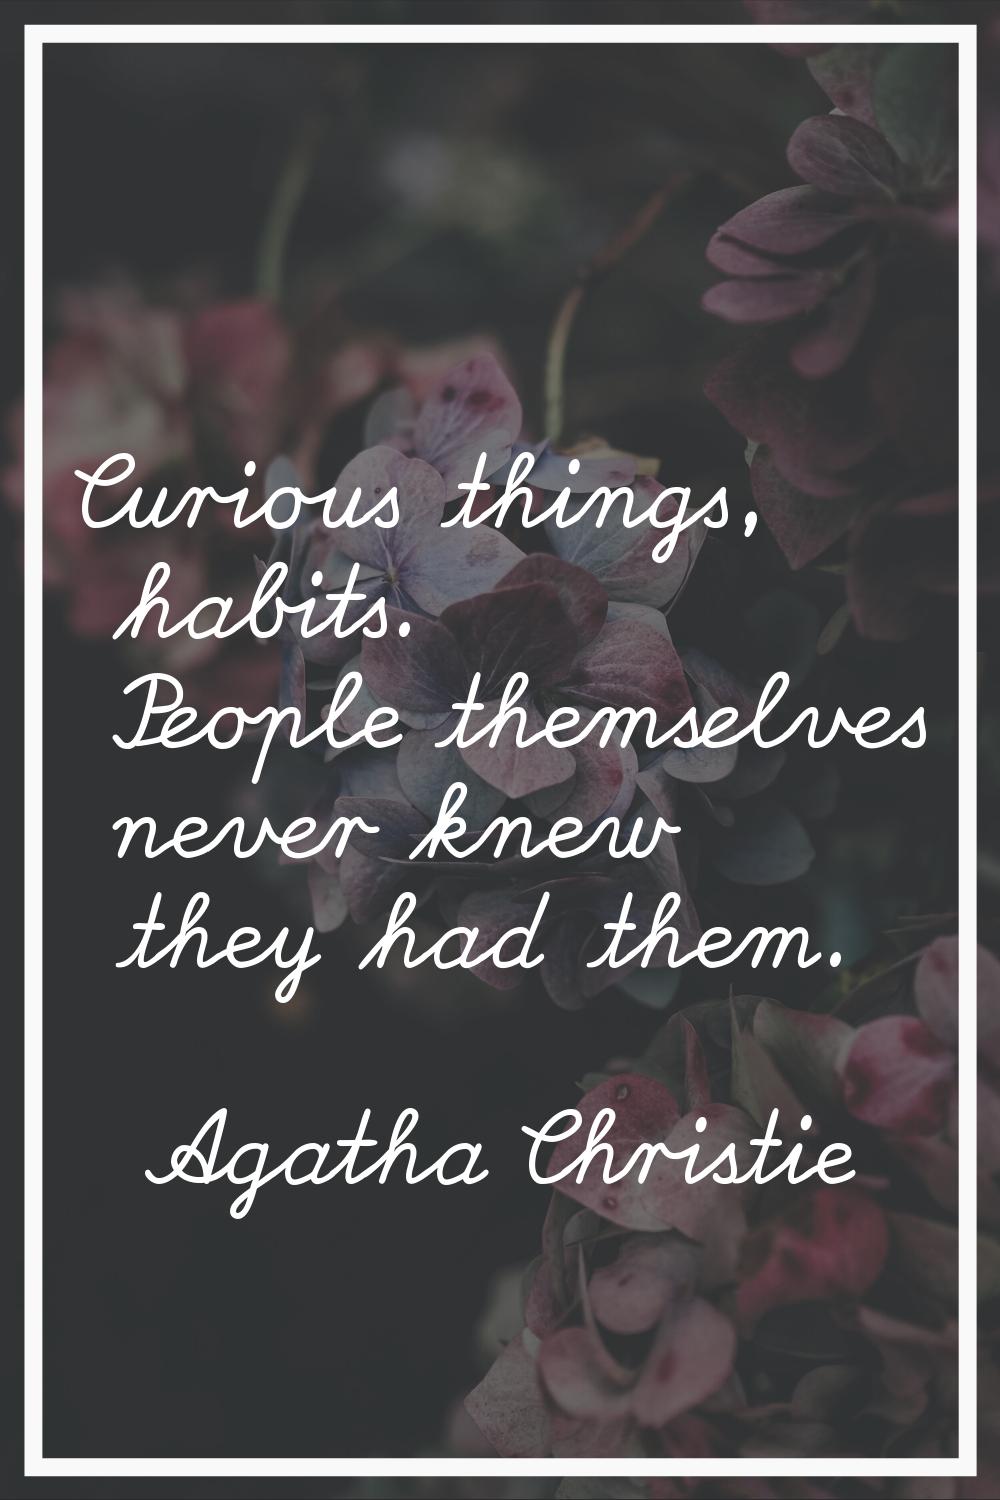 Curious things, habits. People themselves never knew they had them.